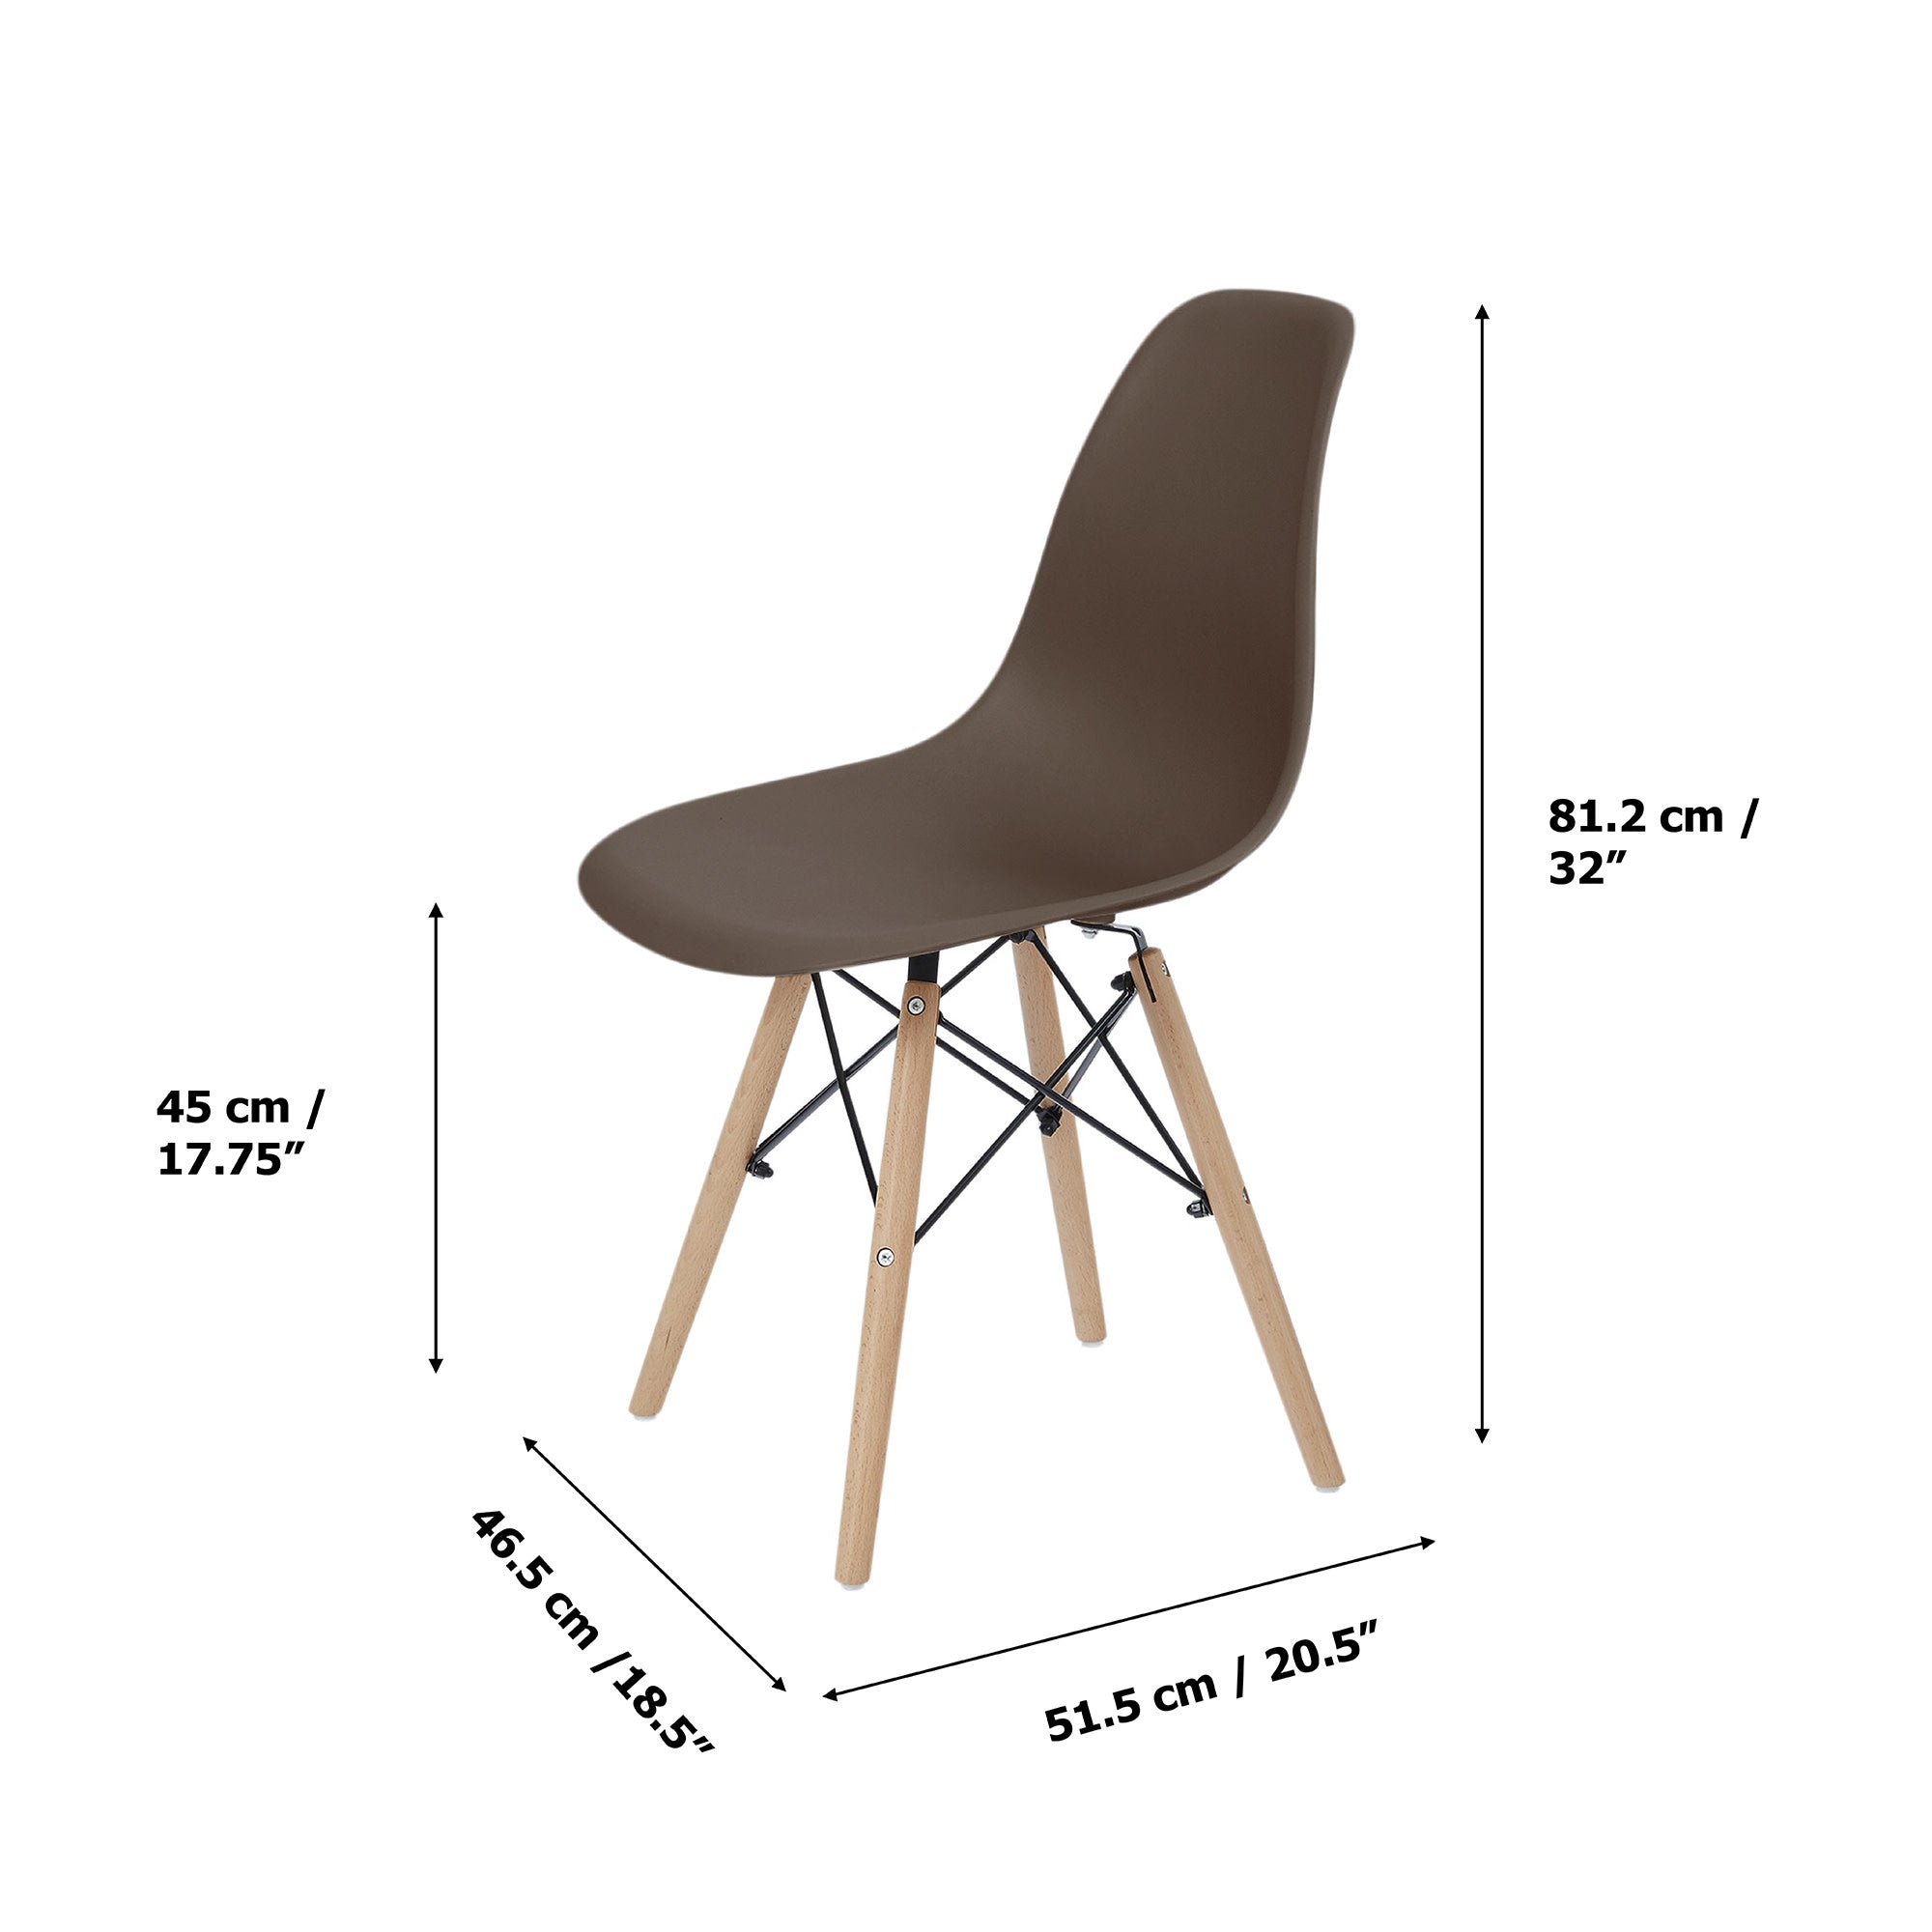 Teamson Home Allan Plastic Side Dining Chair with Wooden Legs Set of 2, Brown